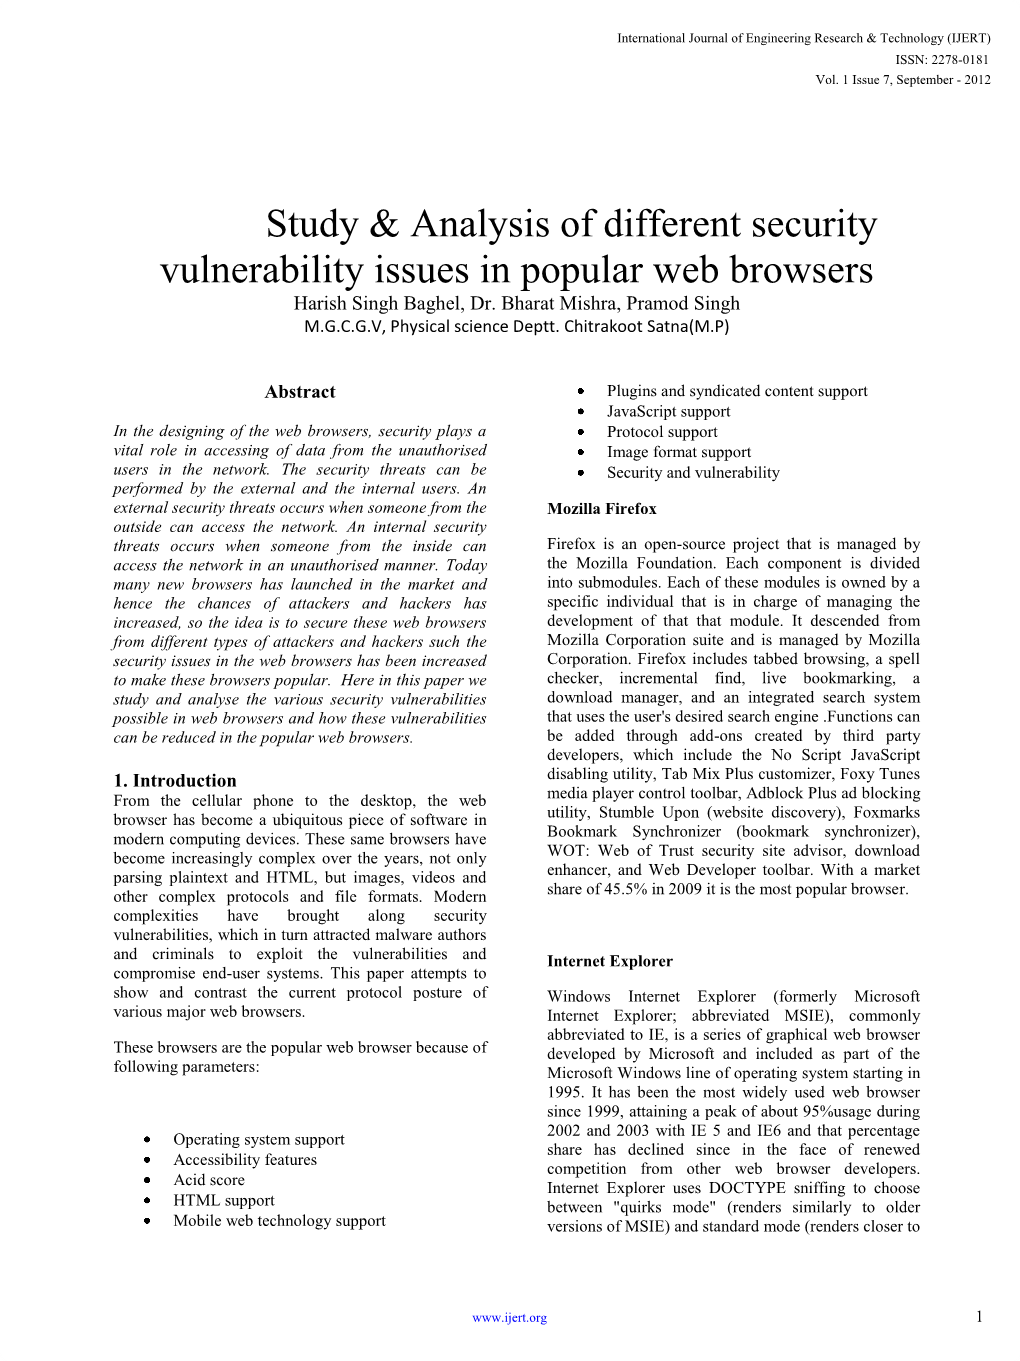 Study & Analysis of Different Security Vulnerability Issues in Popular Web